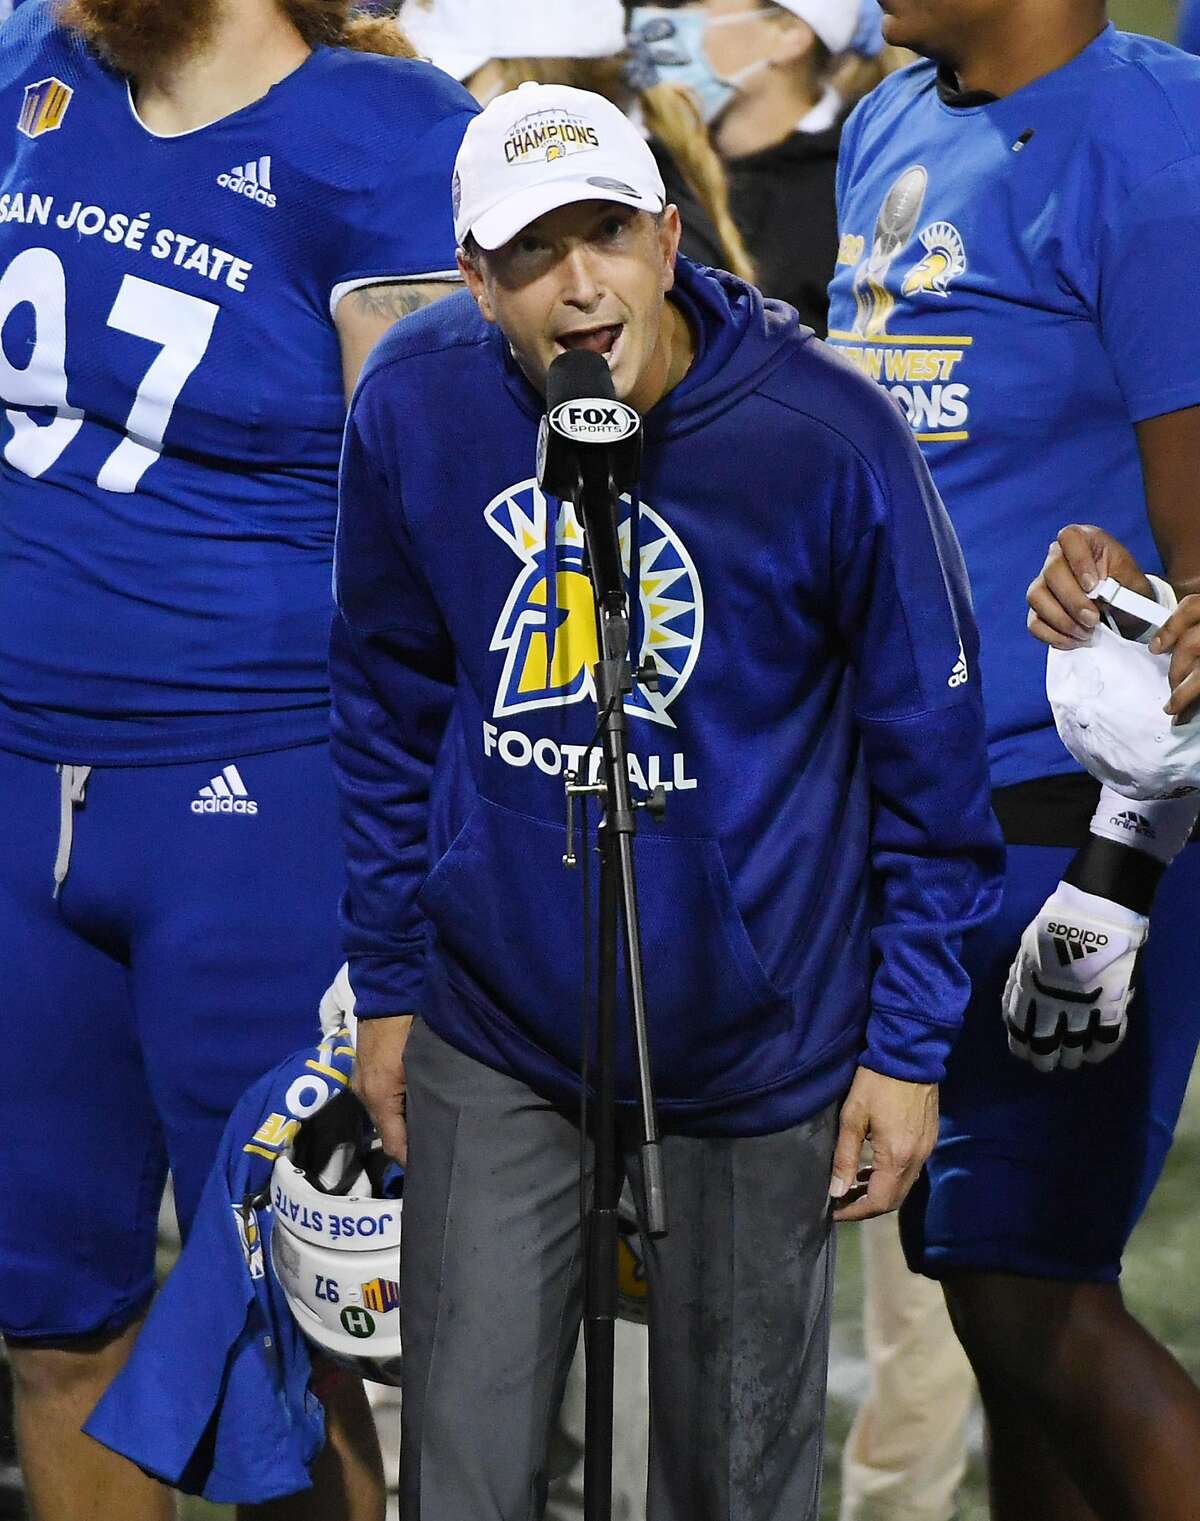 LAS VEGAS, NEVADA - DECEMBER 19: Head coach Brent Brennan of the San Jose State Spartans speaks after his team defeated the Boise State Broncos 34-20 to win the Mountain West Football Championship at Sam Boyd Stadium on December 19, 2020 in Las Vegas, Nevada. (Photo by Ethan Miller/Getty Images)